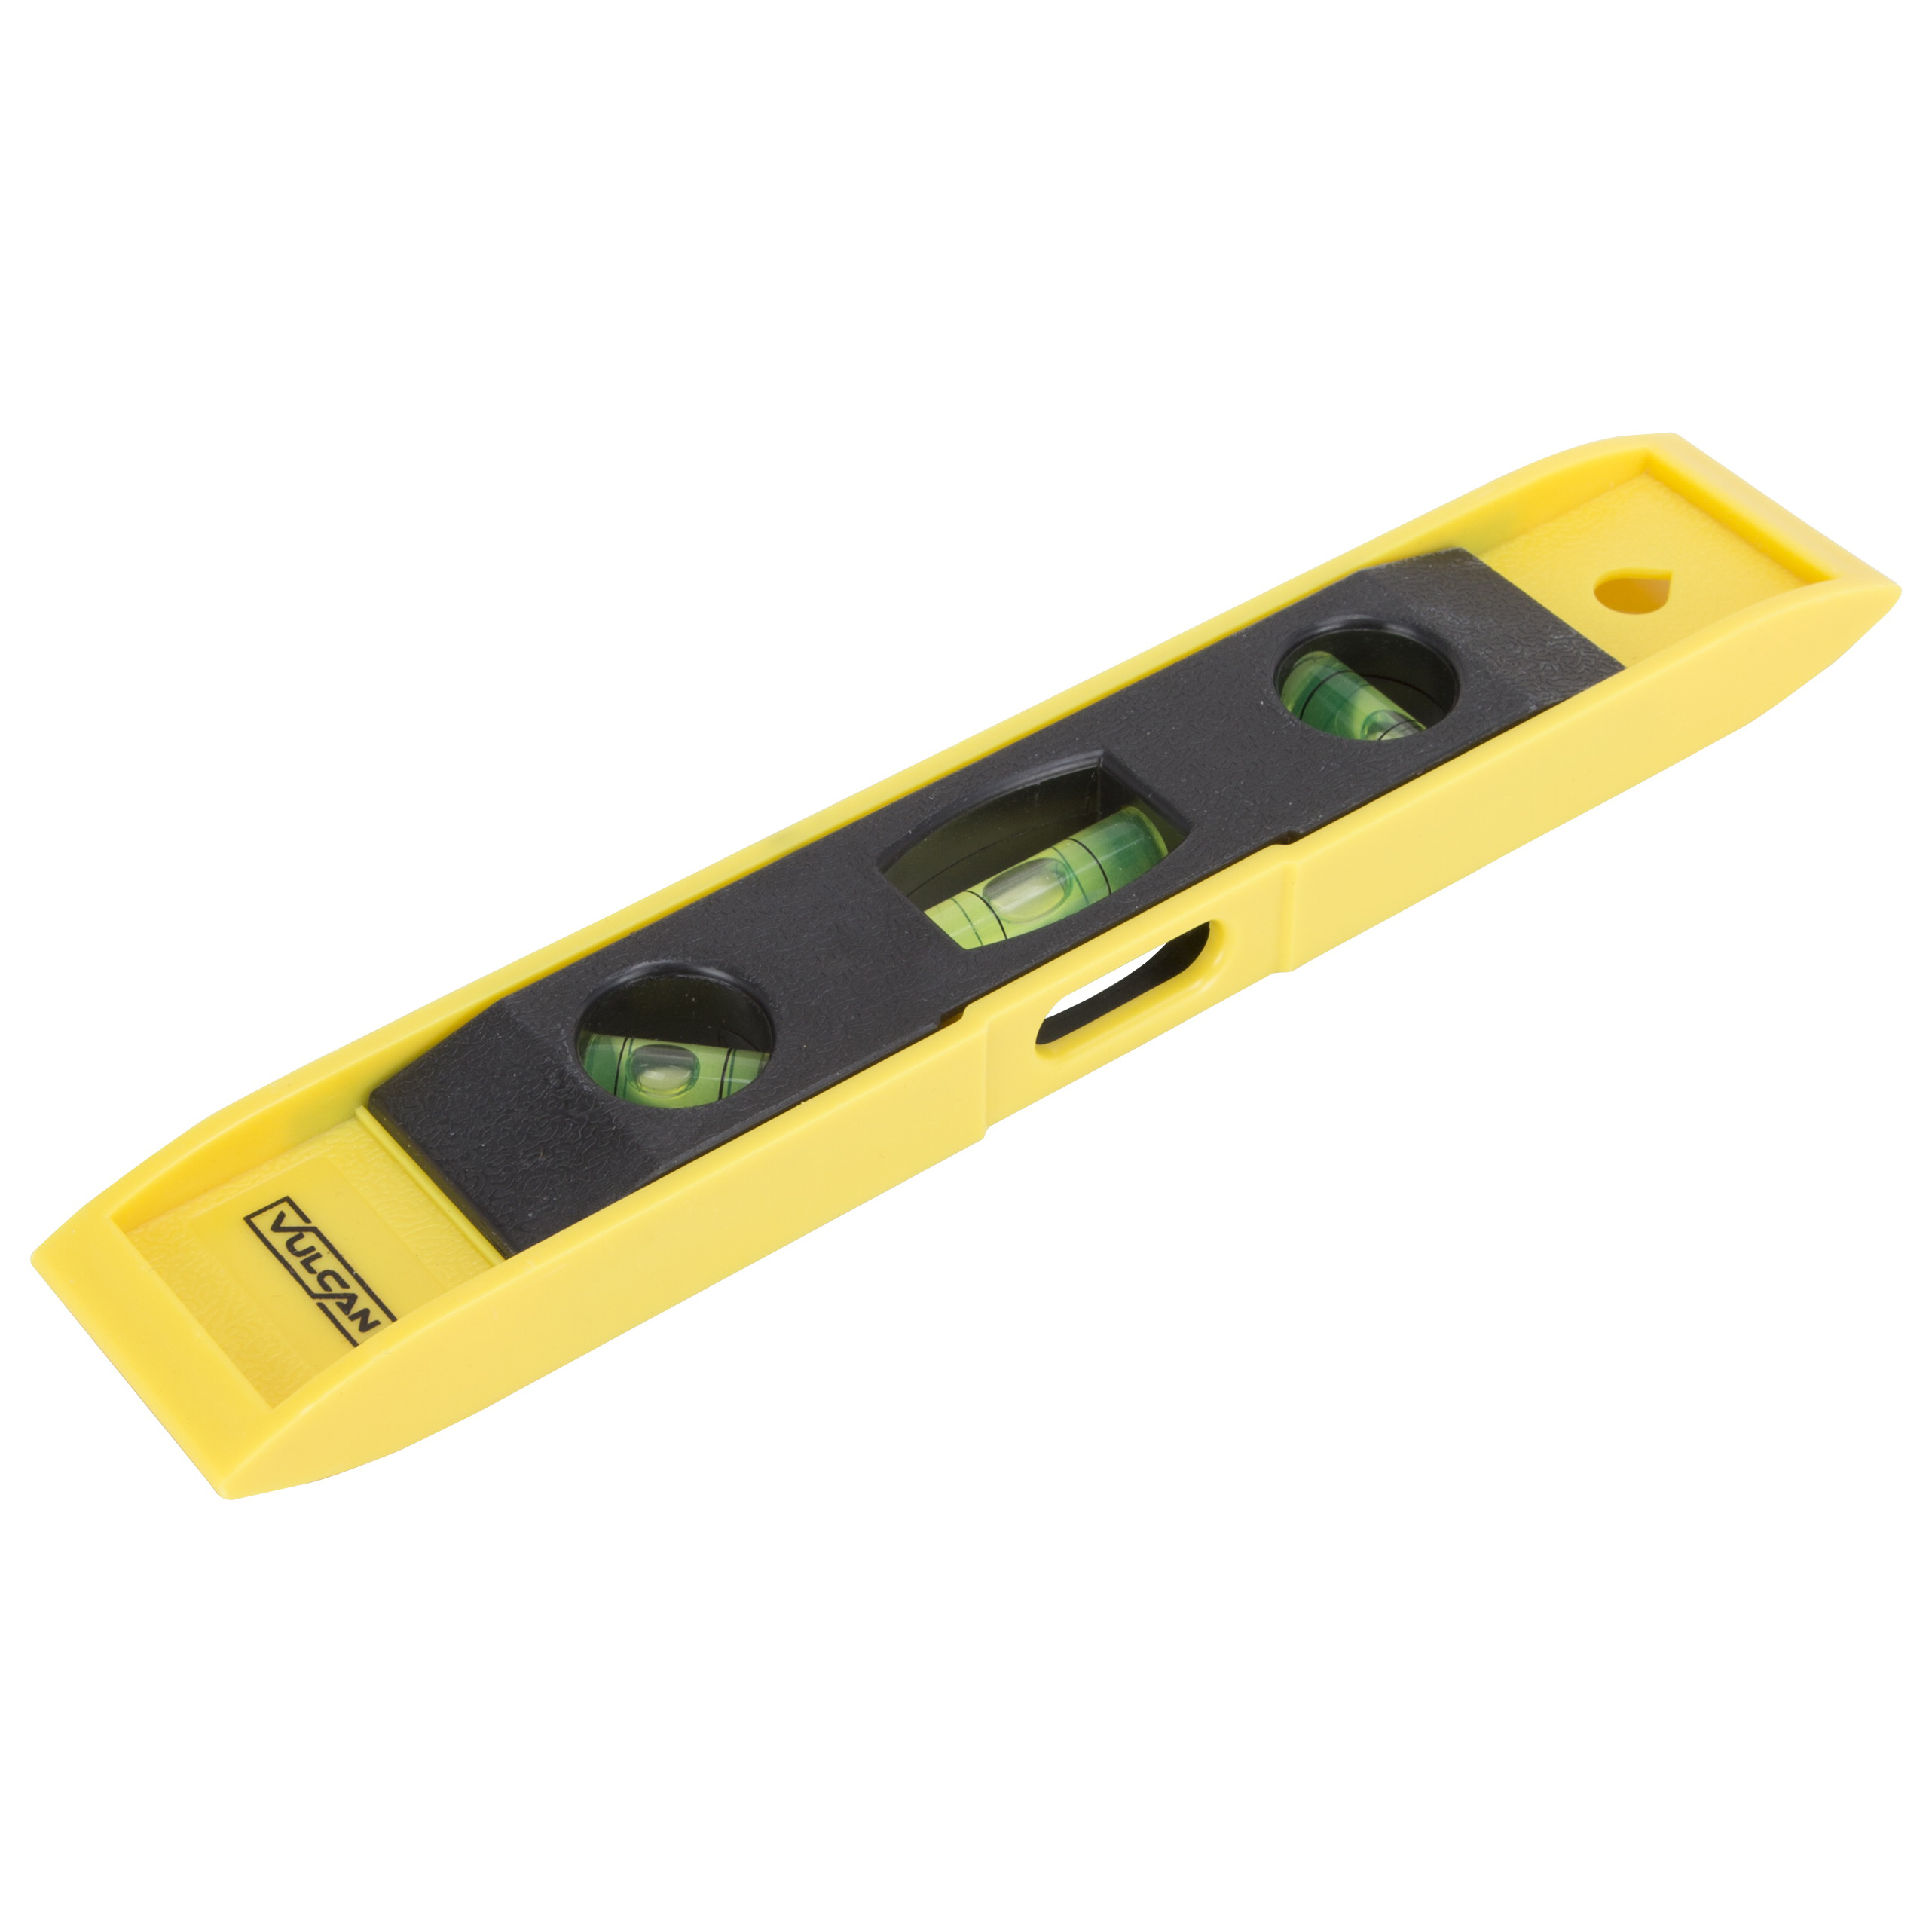 JLO-063 Torpedo Level, 9 in L, 3-Vial, 1-Hang Hole, Magnetic, Plastic